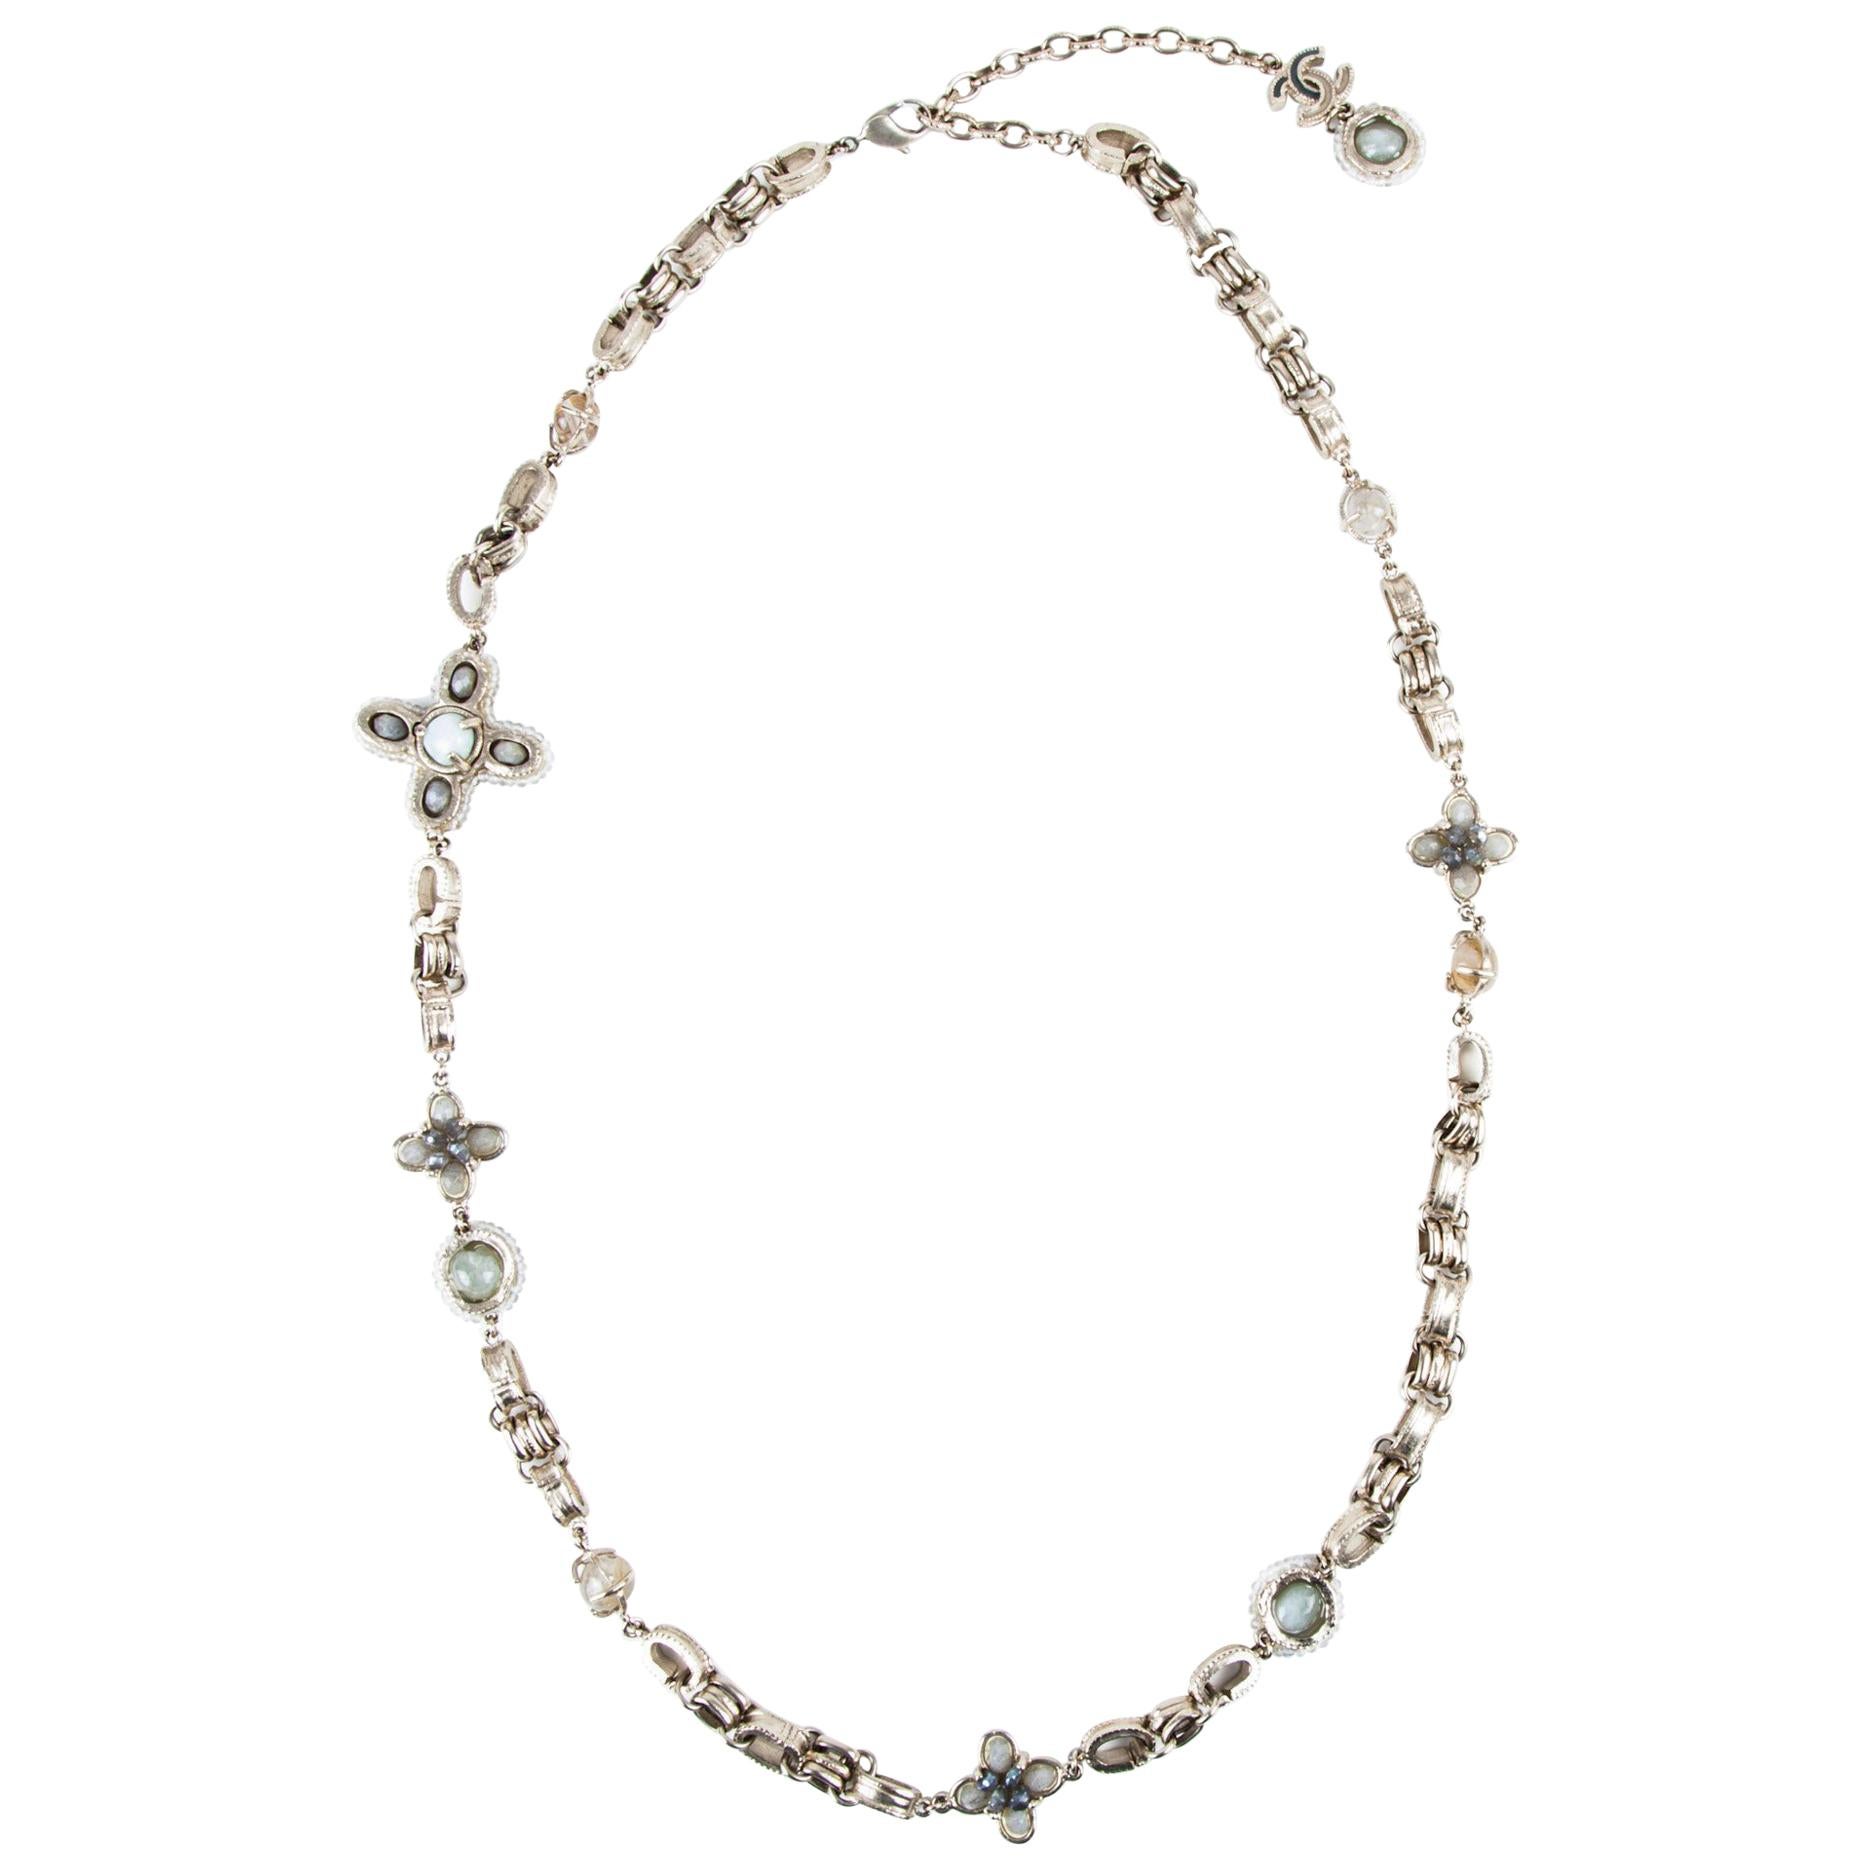 Chanel Paris-Bombay Beaded Necklace in Matte Gilt Metal